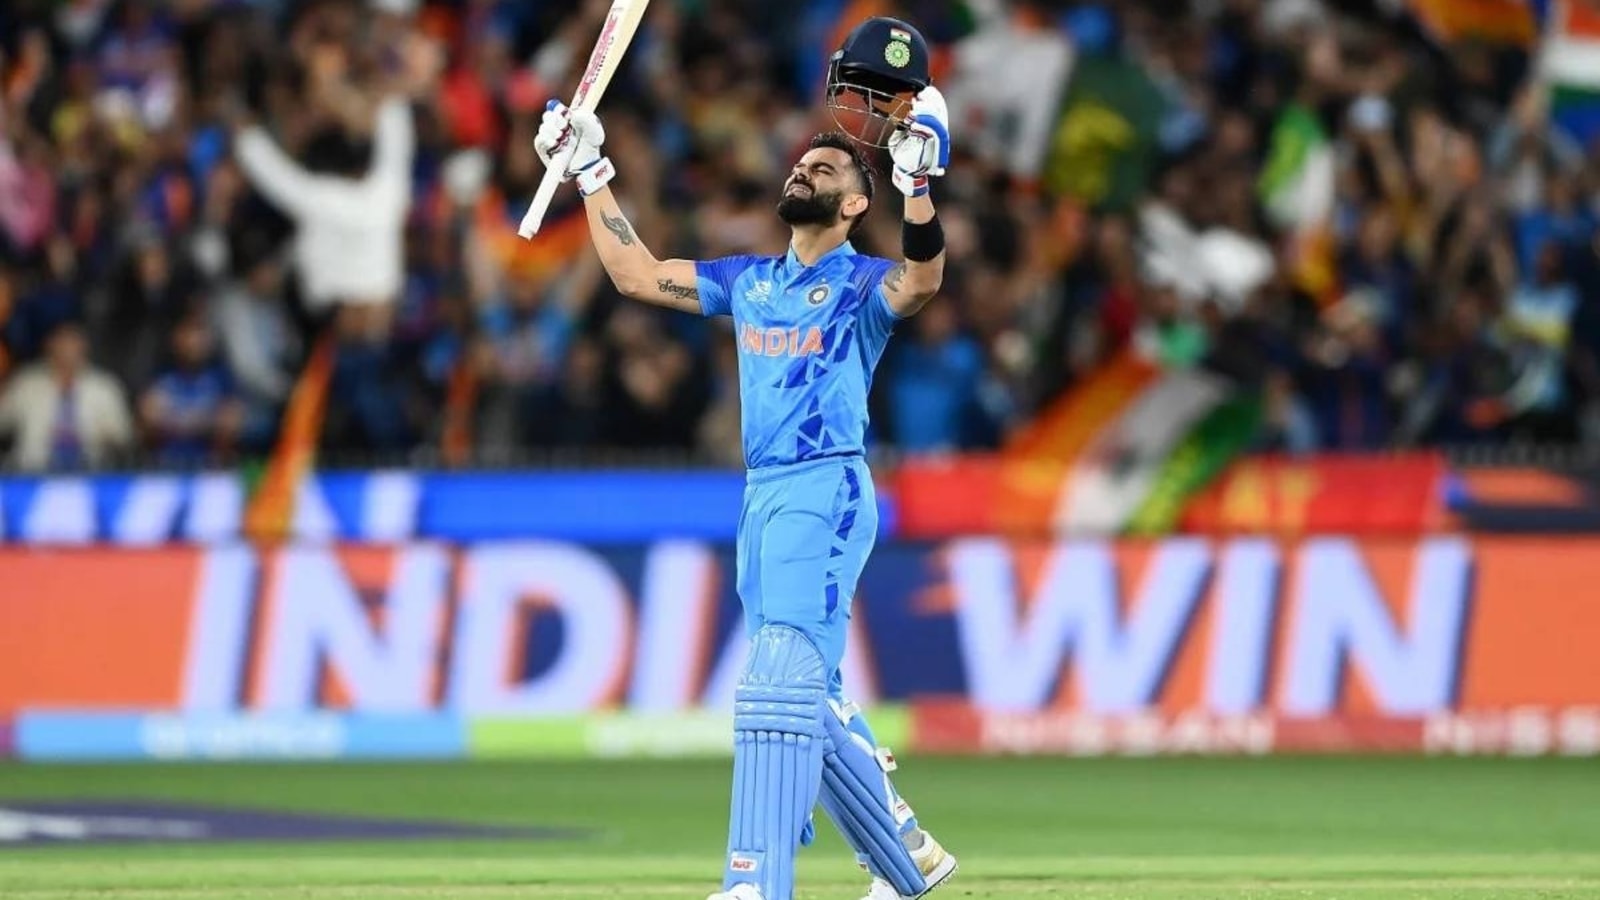 India vs Pakistan, T20 World Cup 2022 Highlights Epic Virat Kohli innings leads IND to 4-wicket win in nail-biter Hindustan Times